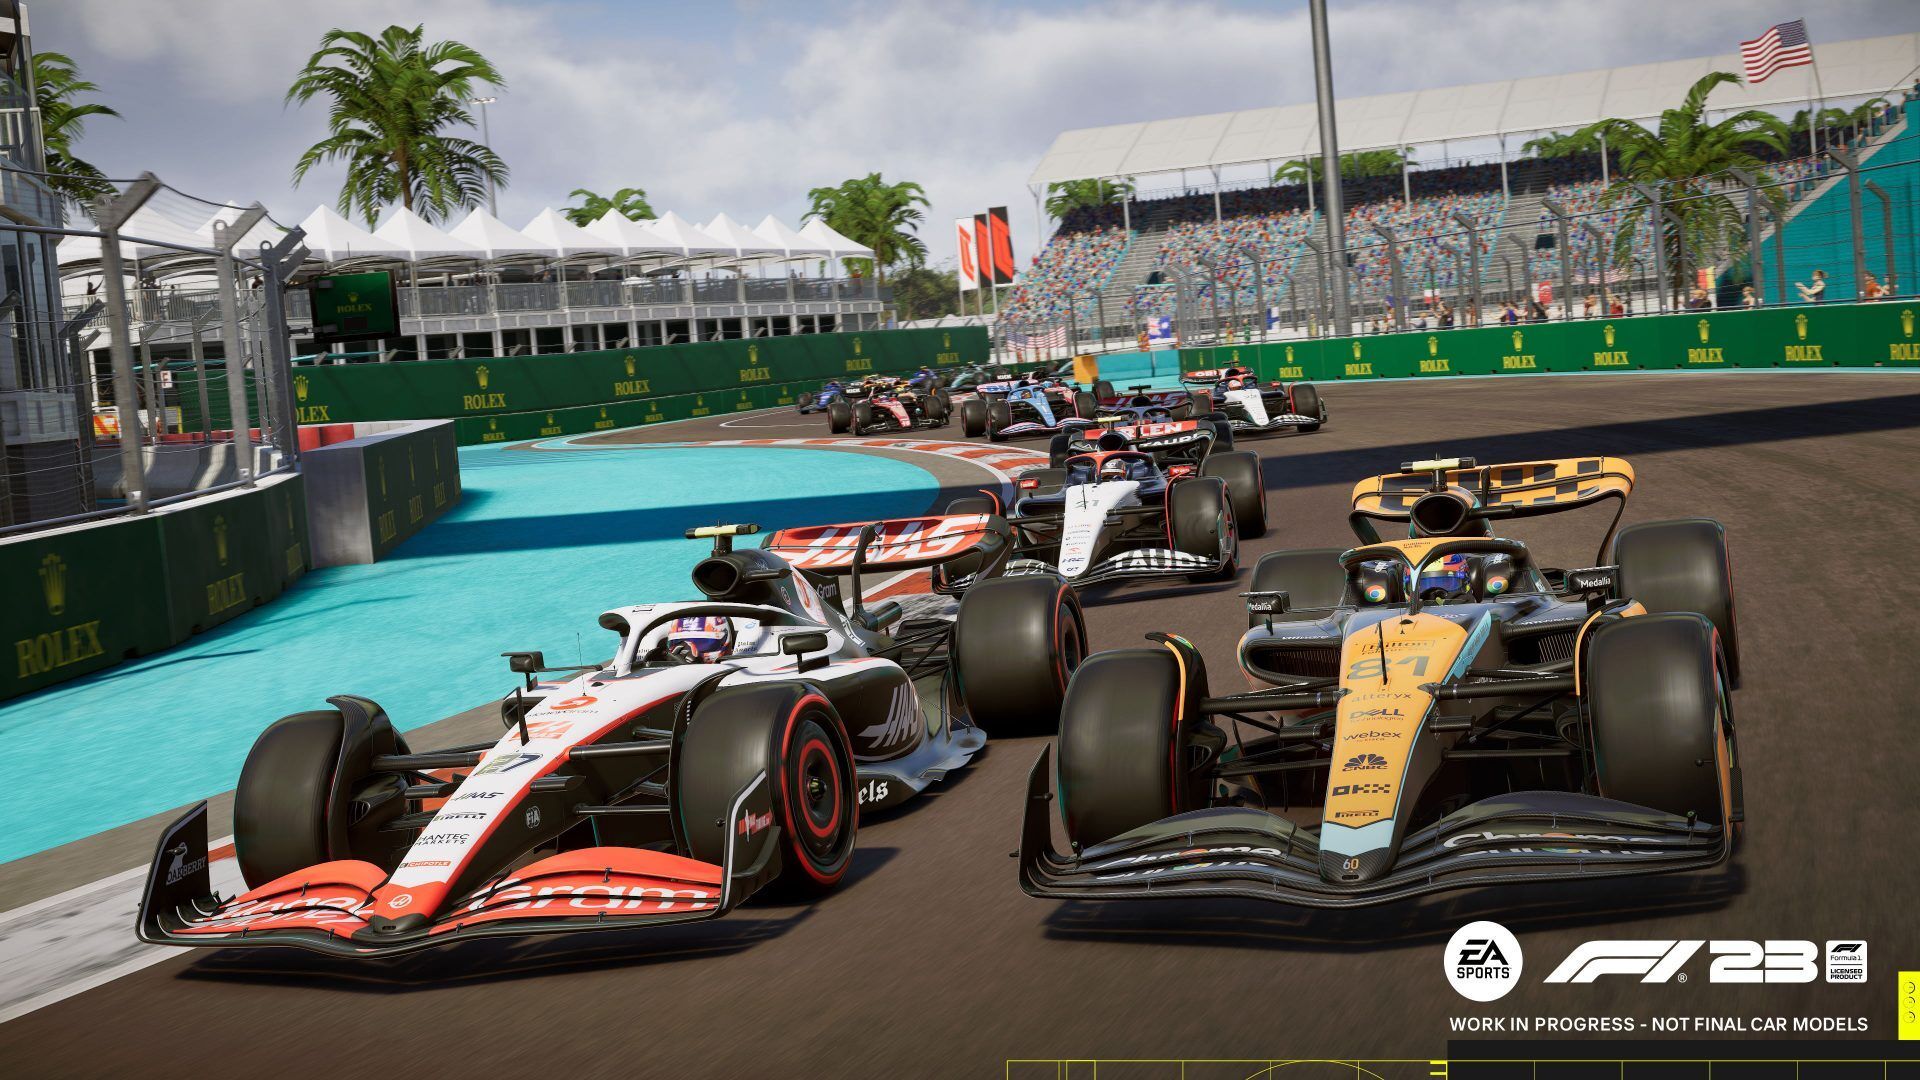 23 revealed date game EA is details release Sports F1 on as